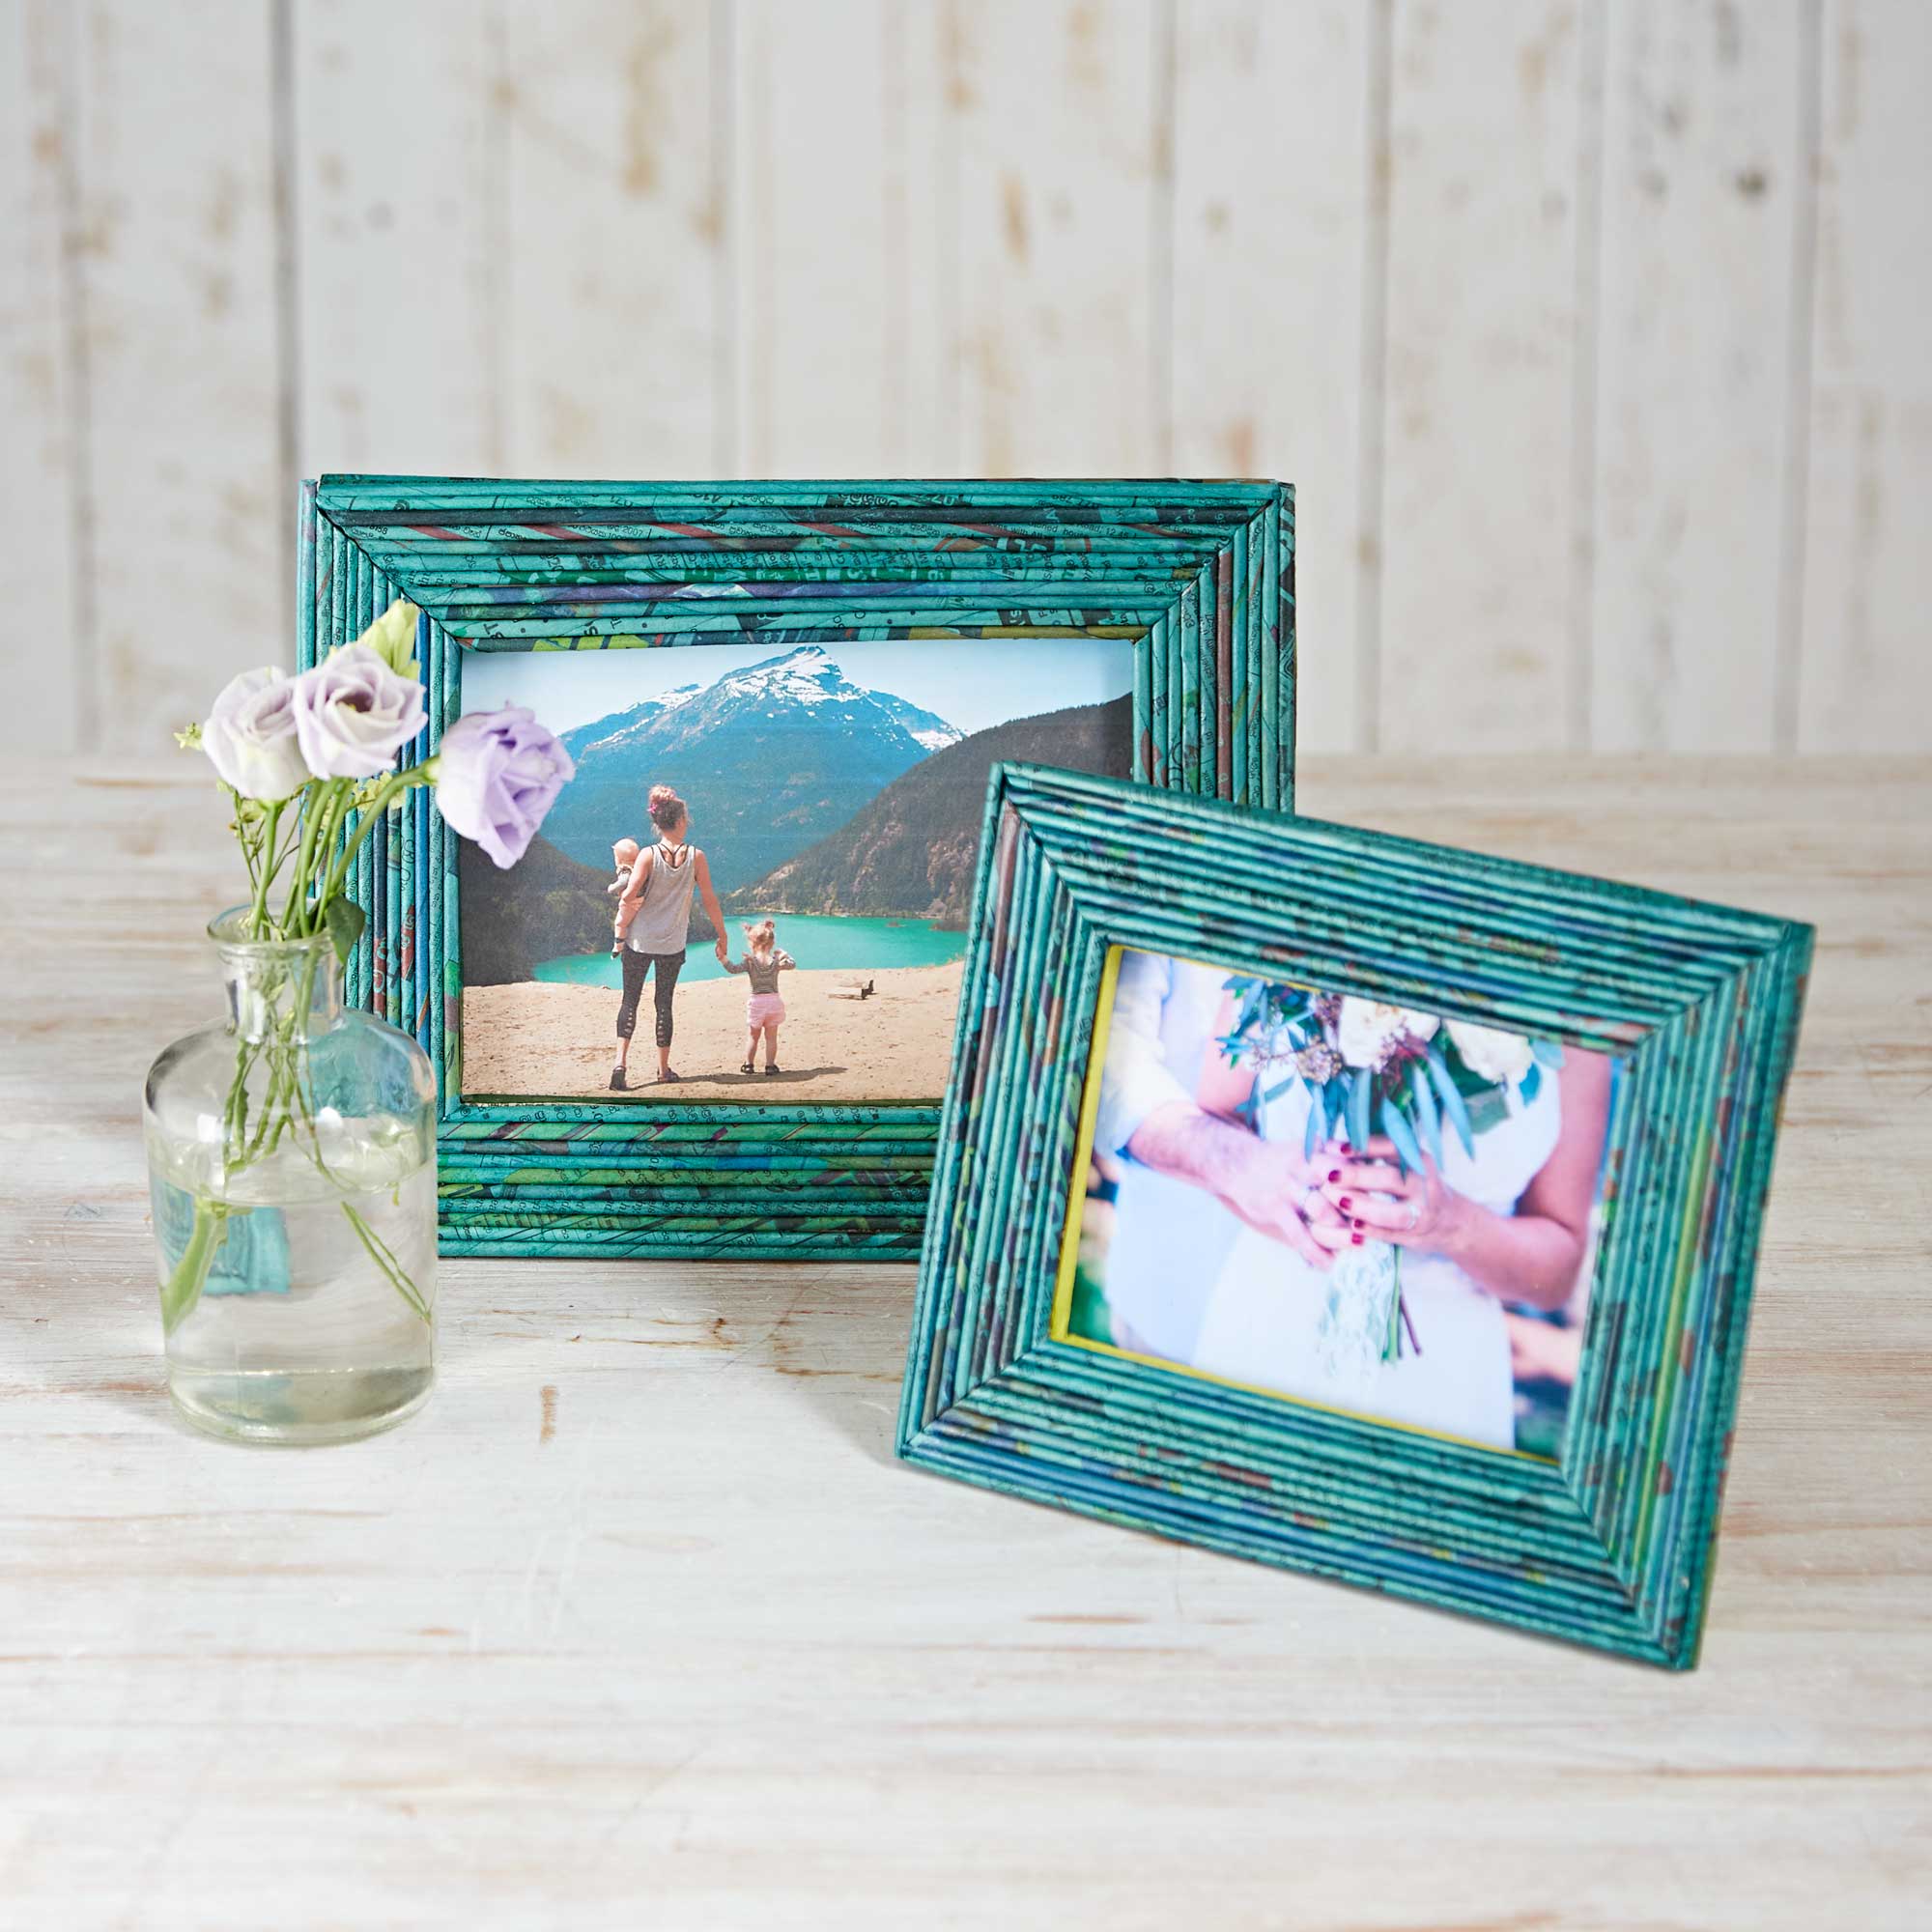 Recycled Newspaper Photo Frame - 5 x 7 inch Picture Frame